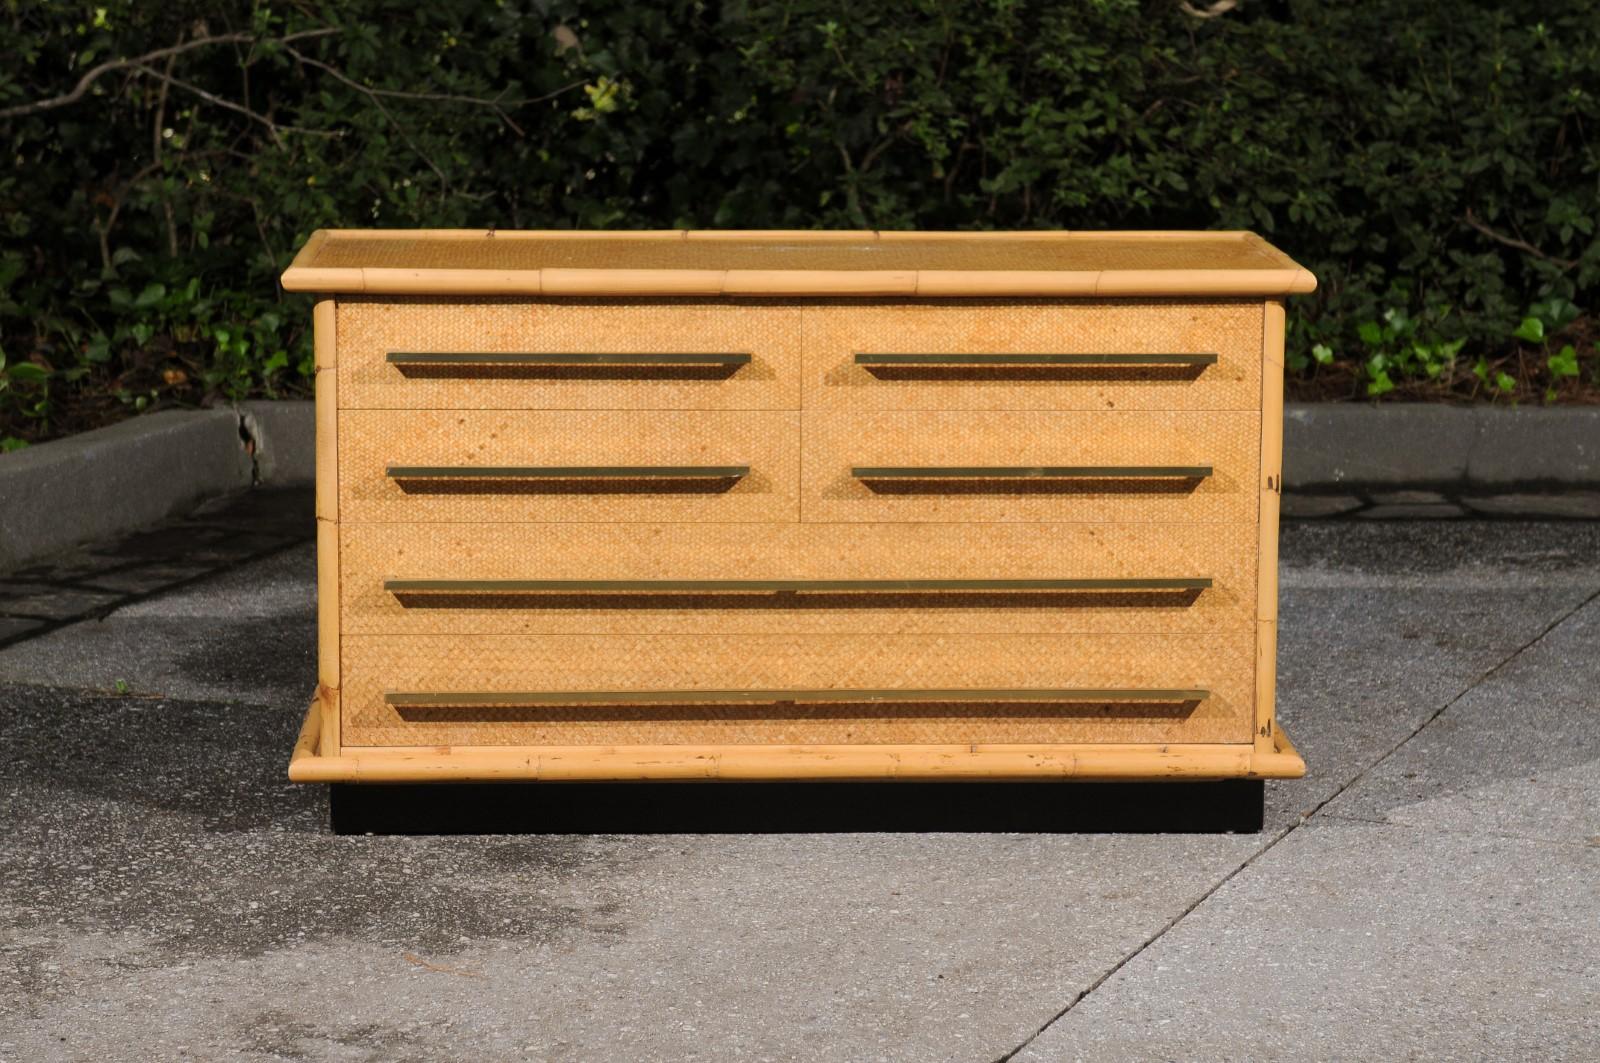 This magnificent chest is shipped as professionally photographed and described in the listing narrative: Meticulously professionally restored and completely installation ready.

A fabulous organic chest from a coveted low production series by